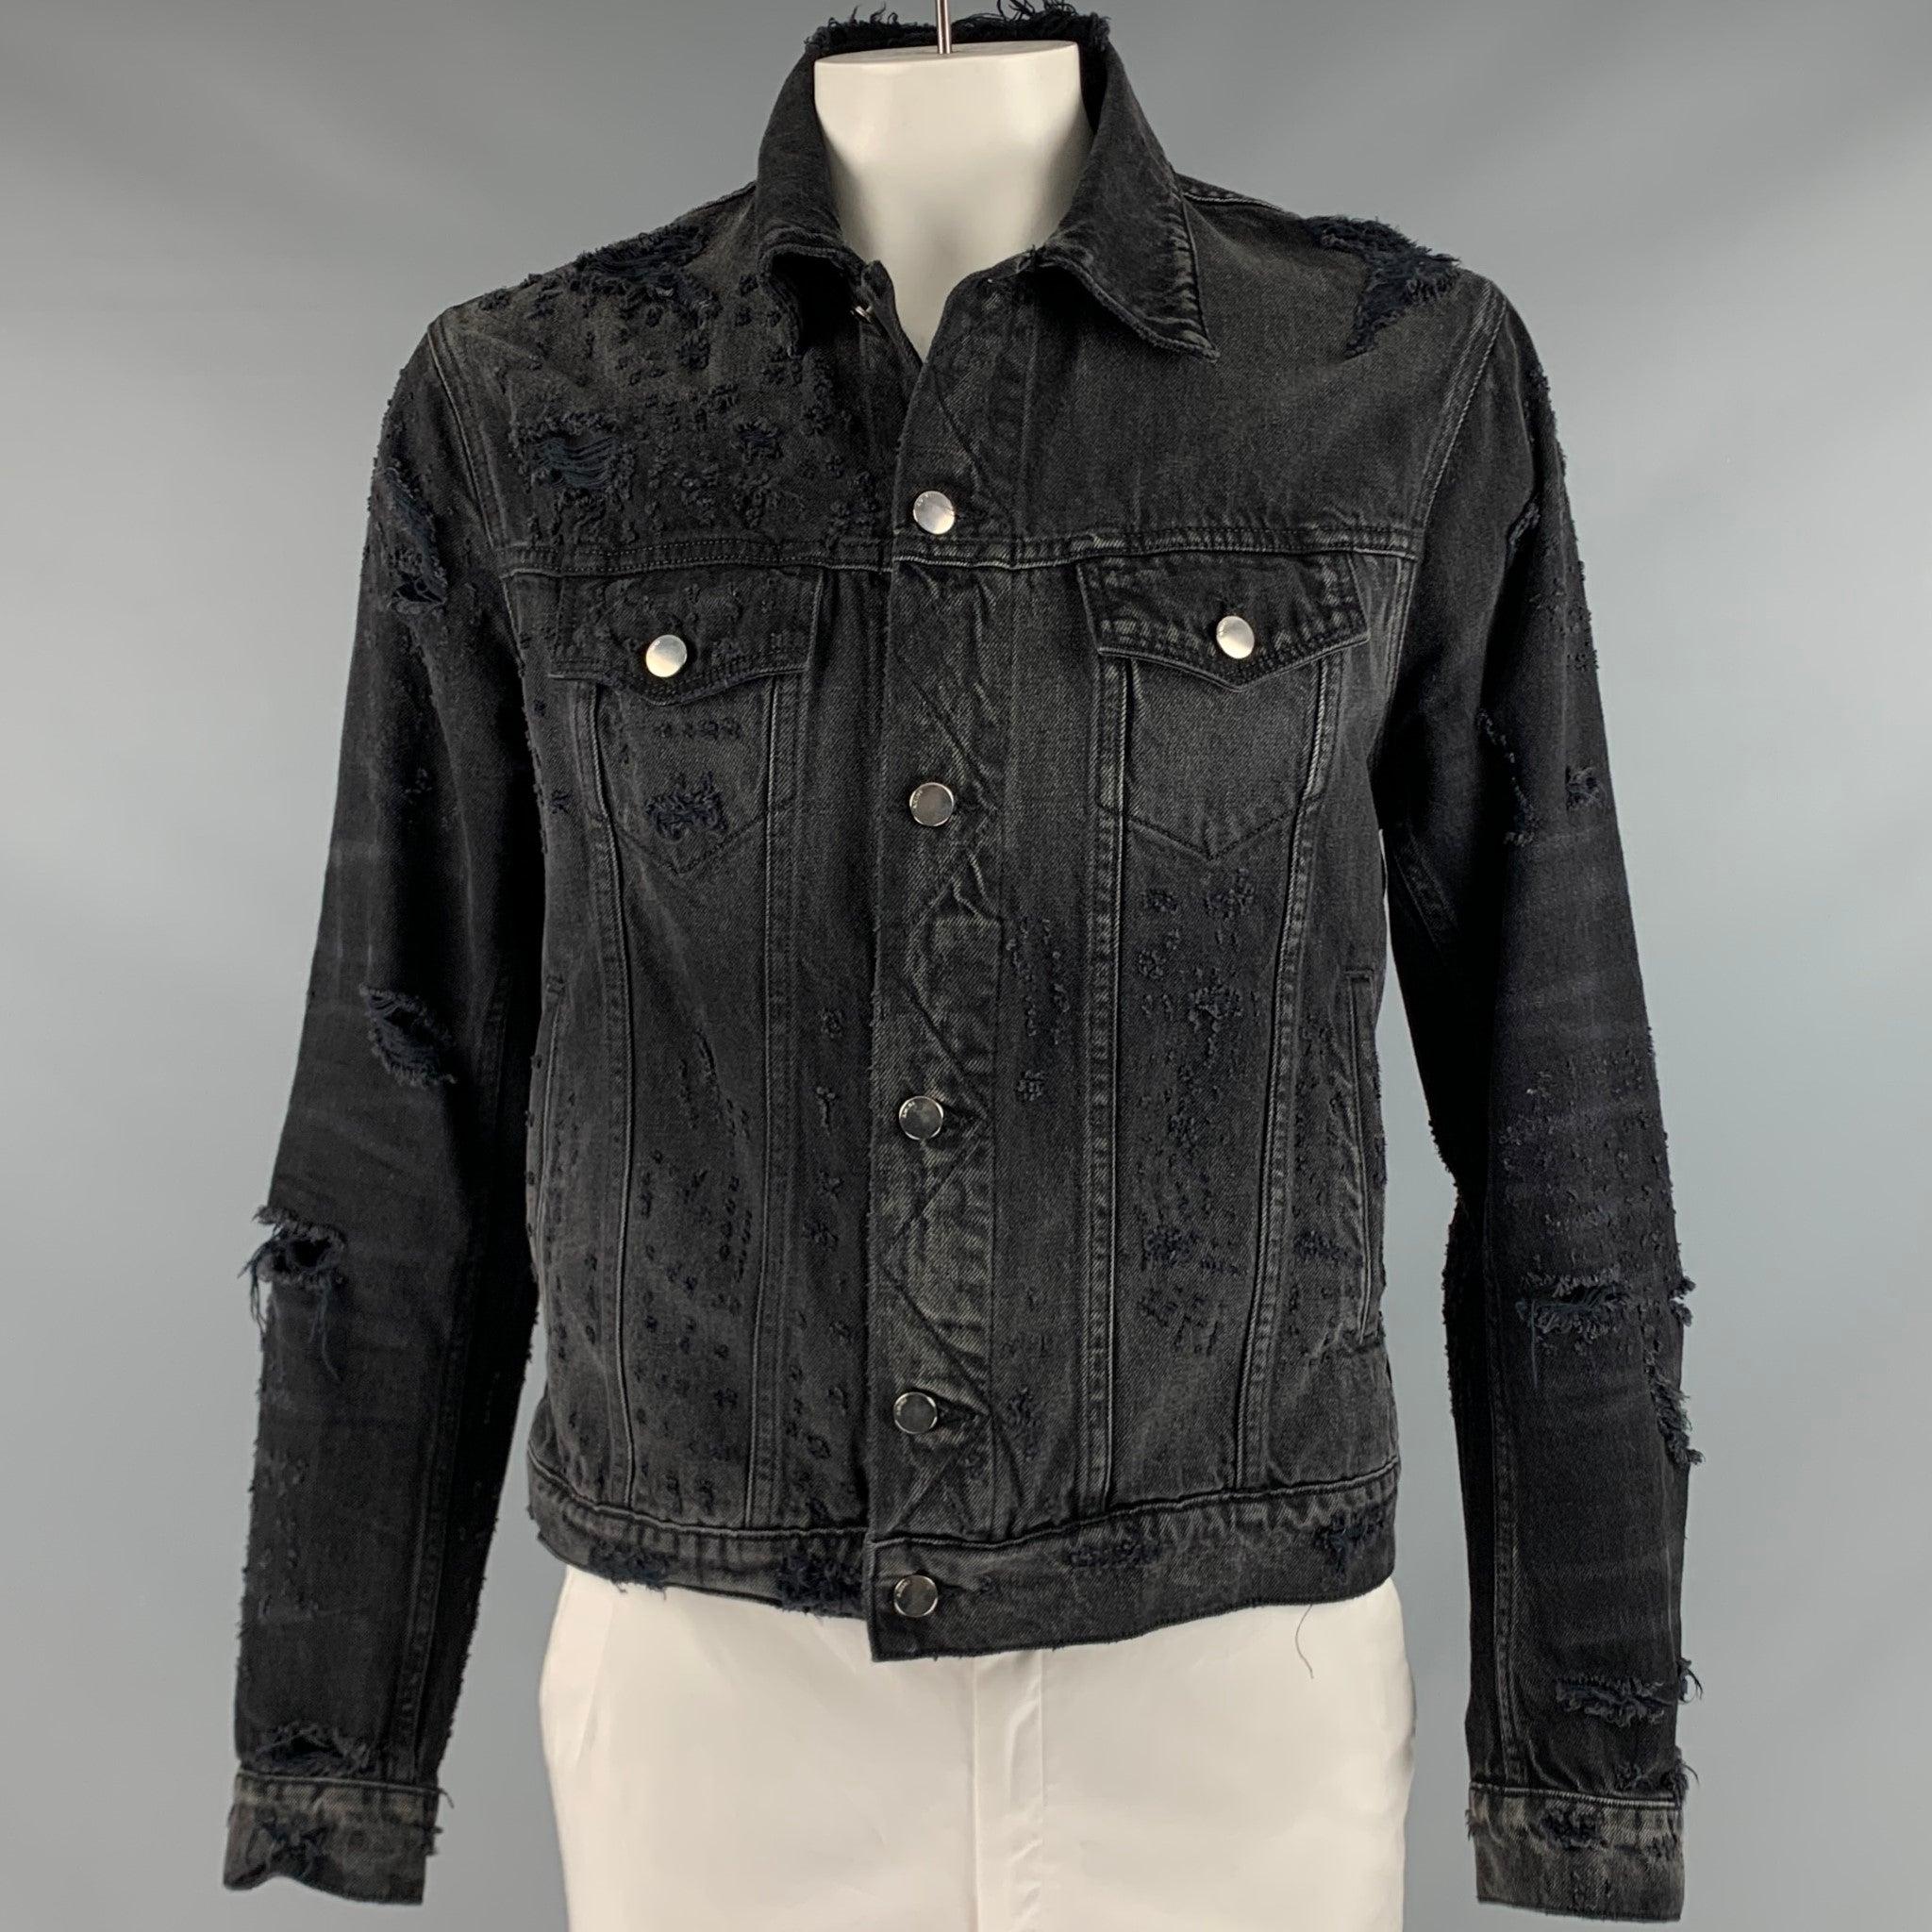 AMIRI jacket
in a black and grey cotton fabric featuring a trucker style, distressed details, two patch pockets, and a button closure. Made in USA.Excellent Pre-Owned Condition. 

Marked:   L 

Measurements: 
 
Shoulder: 18 inches Chest: 42 inches